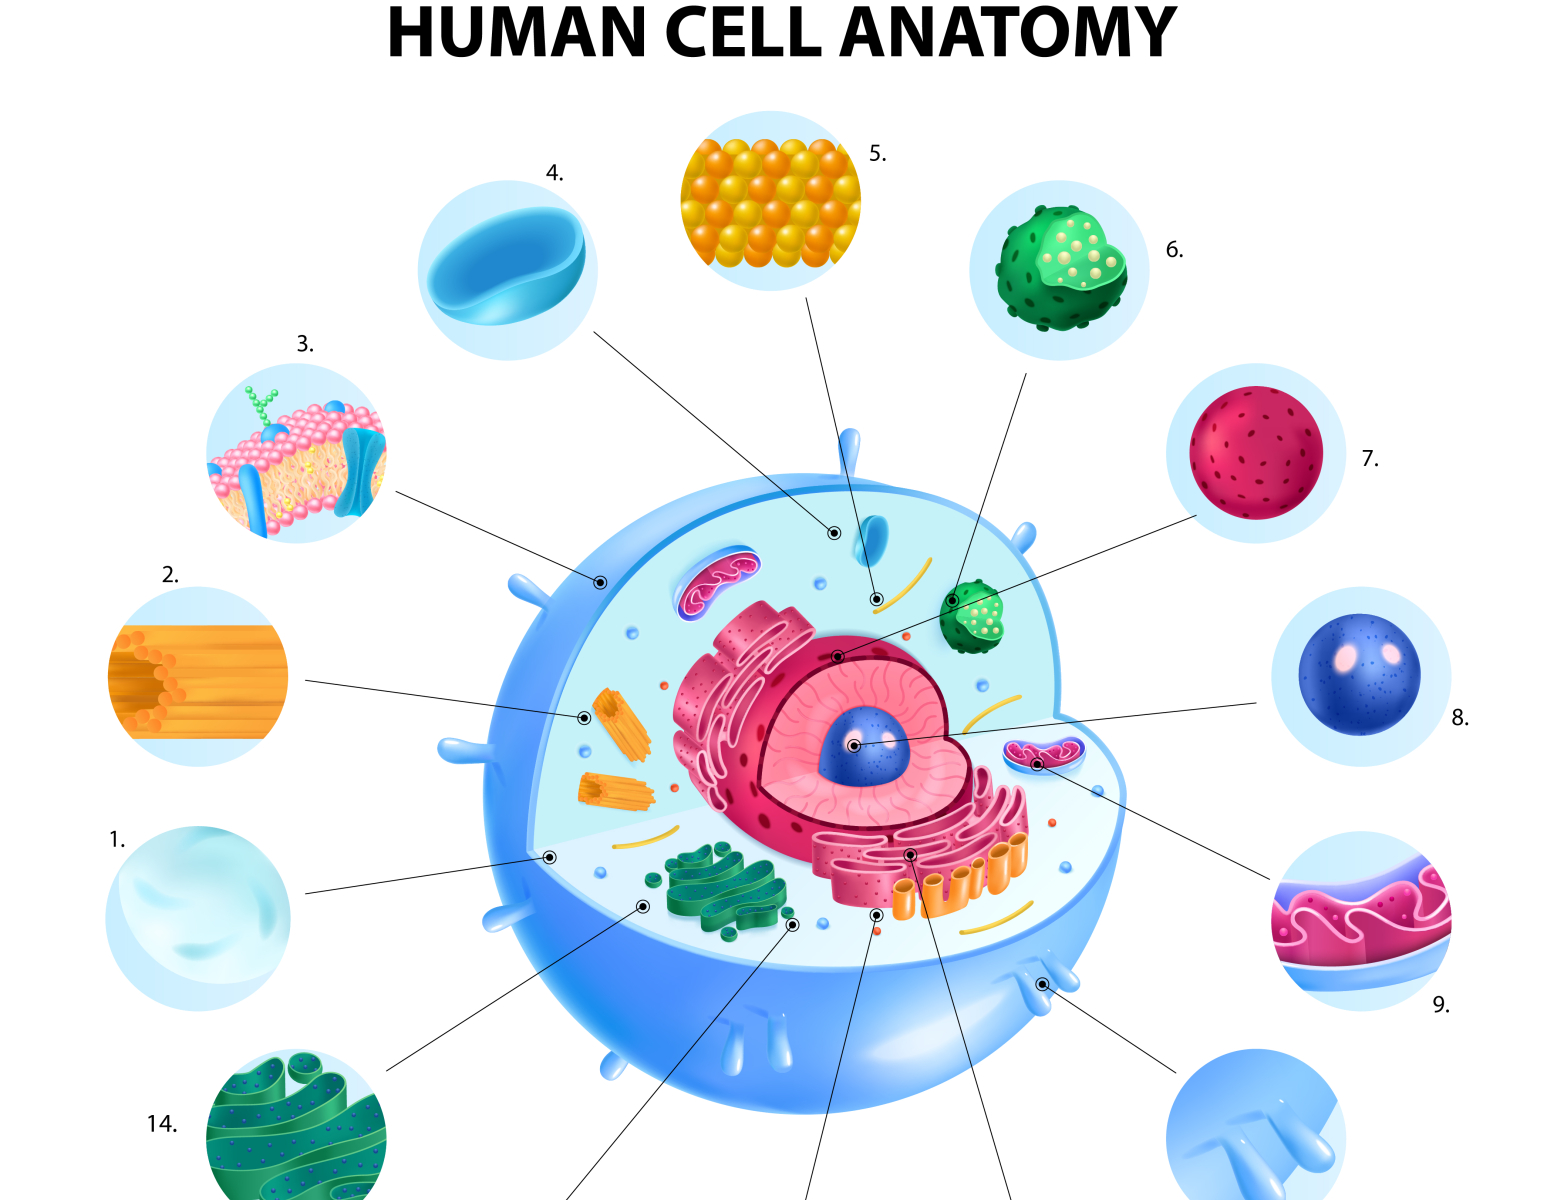 Human cell anatomy infographics by Macrovector on Dribbble